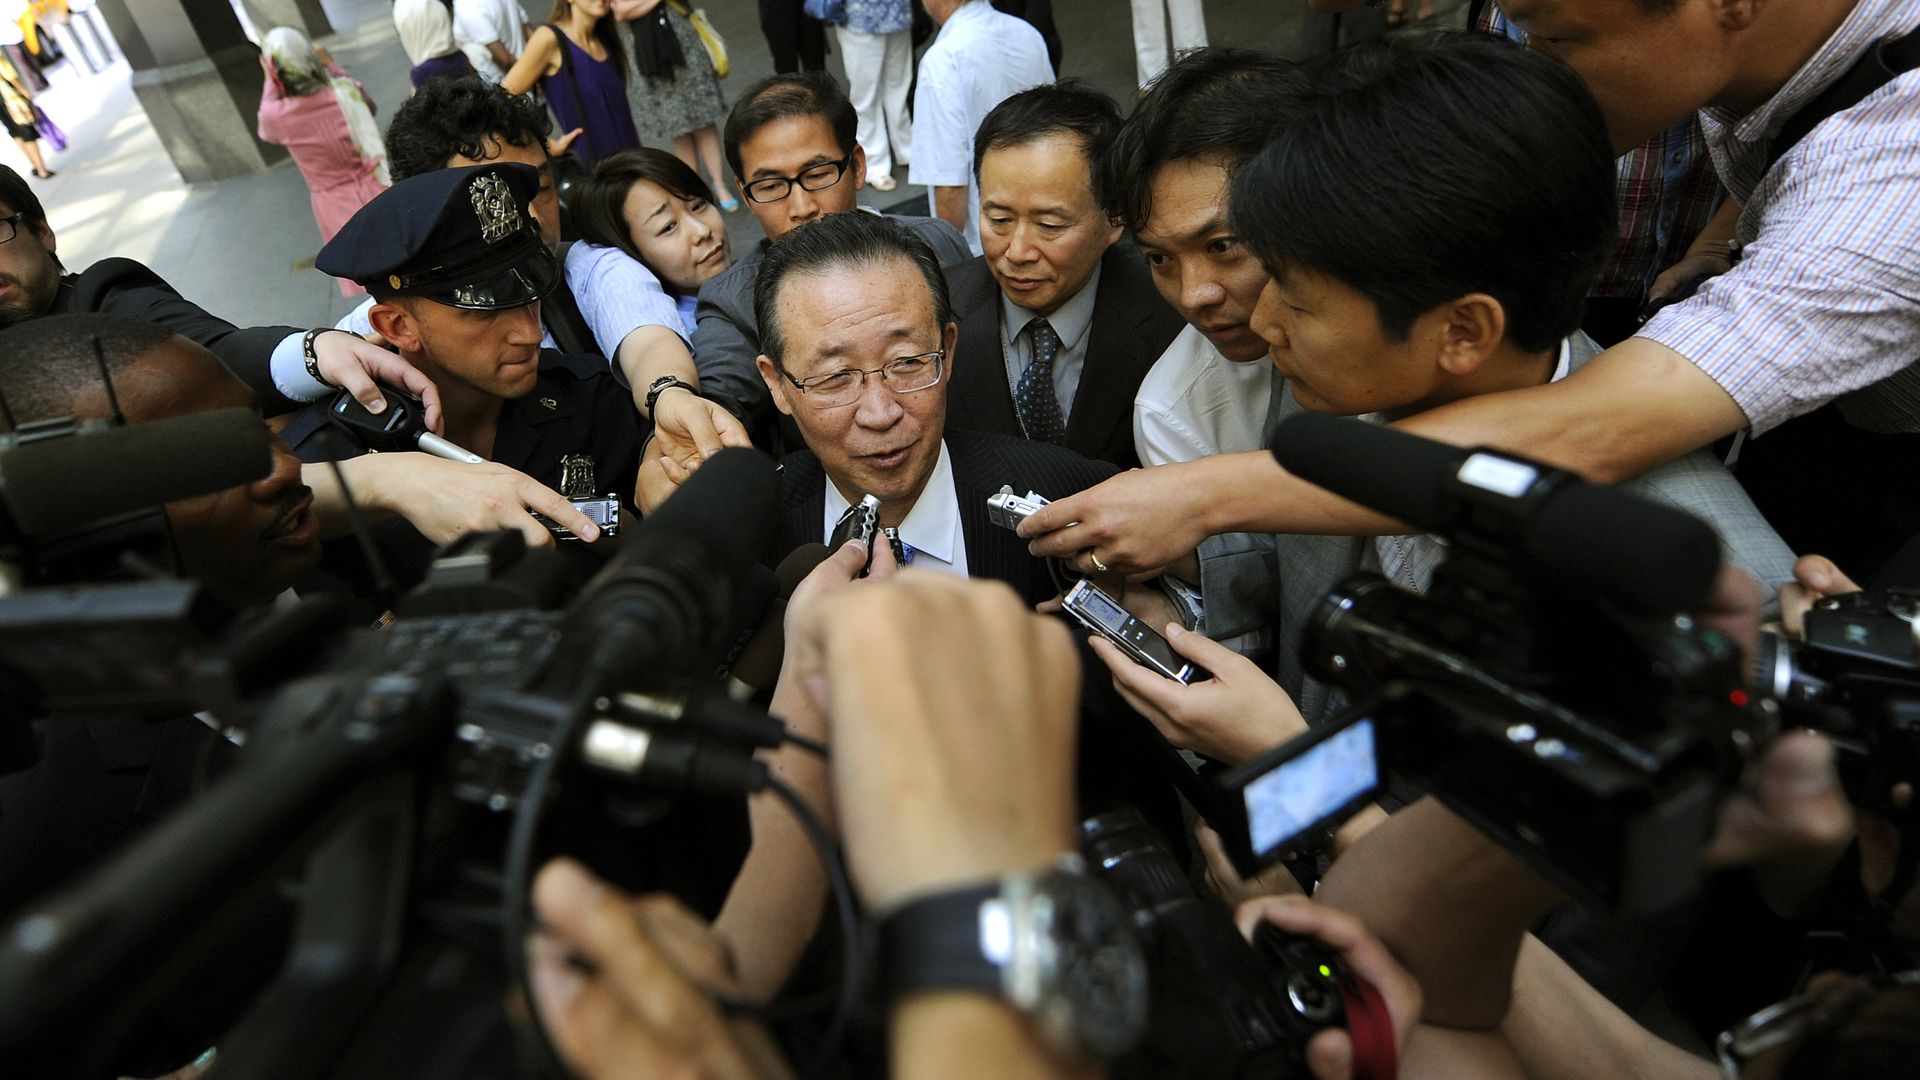 North Korean Vice Foreign Minister Kim Kye Gwan surrounded by media.